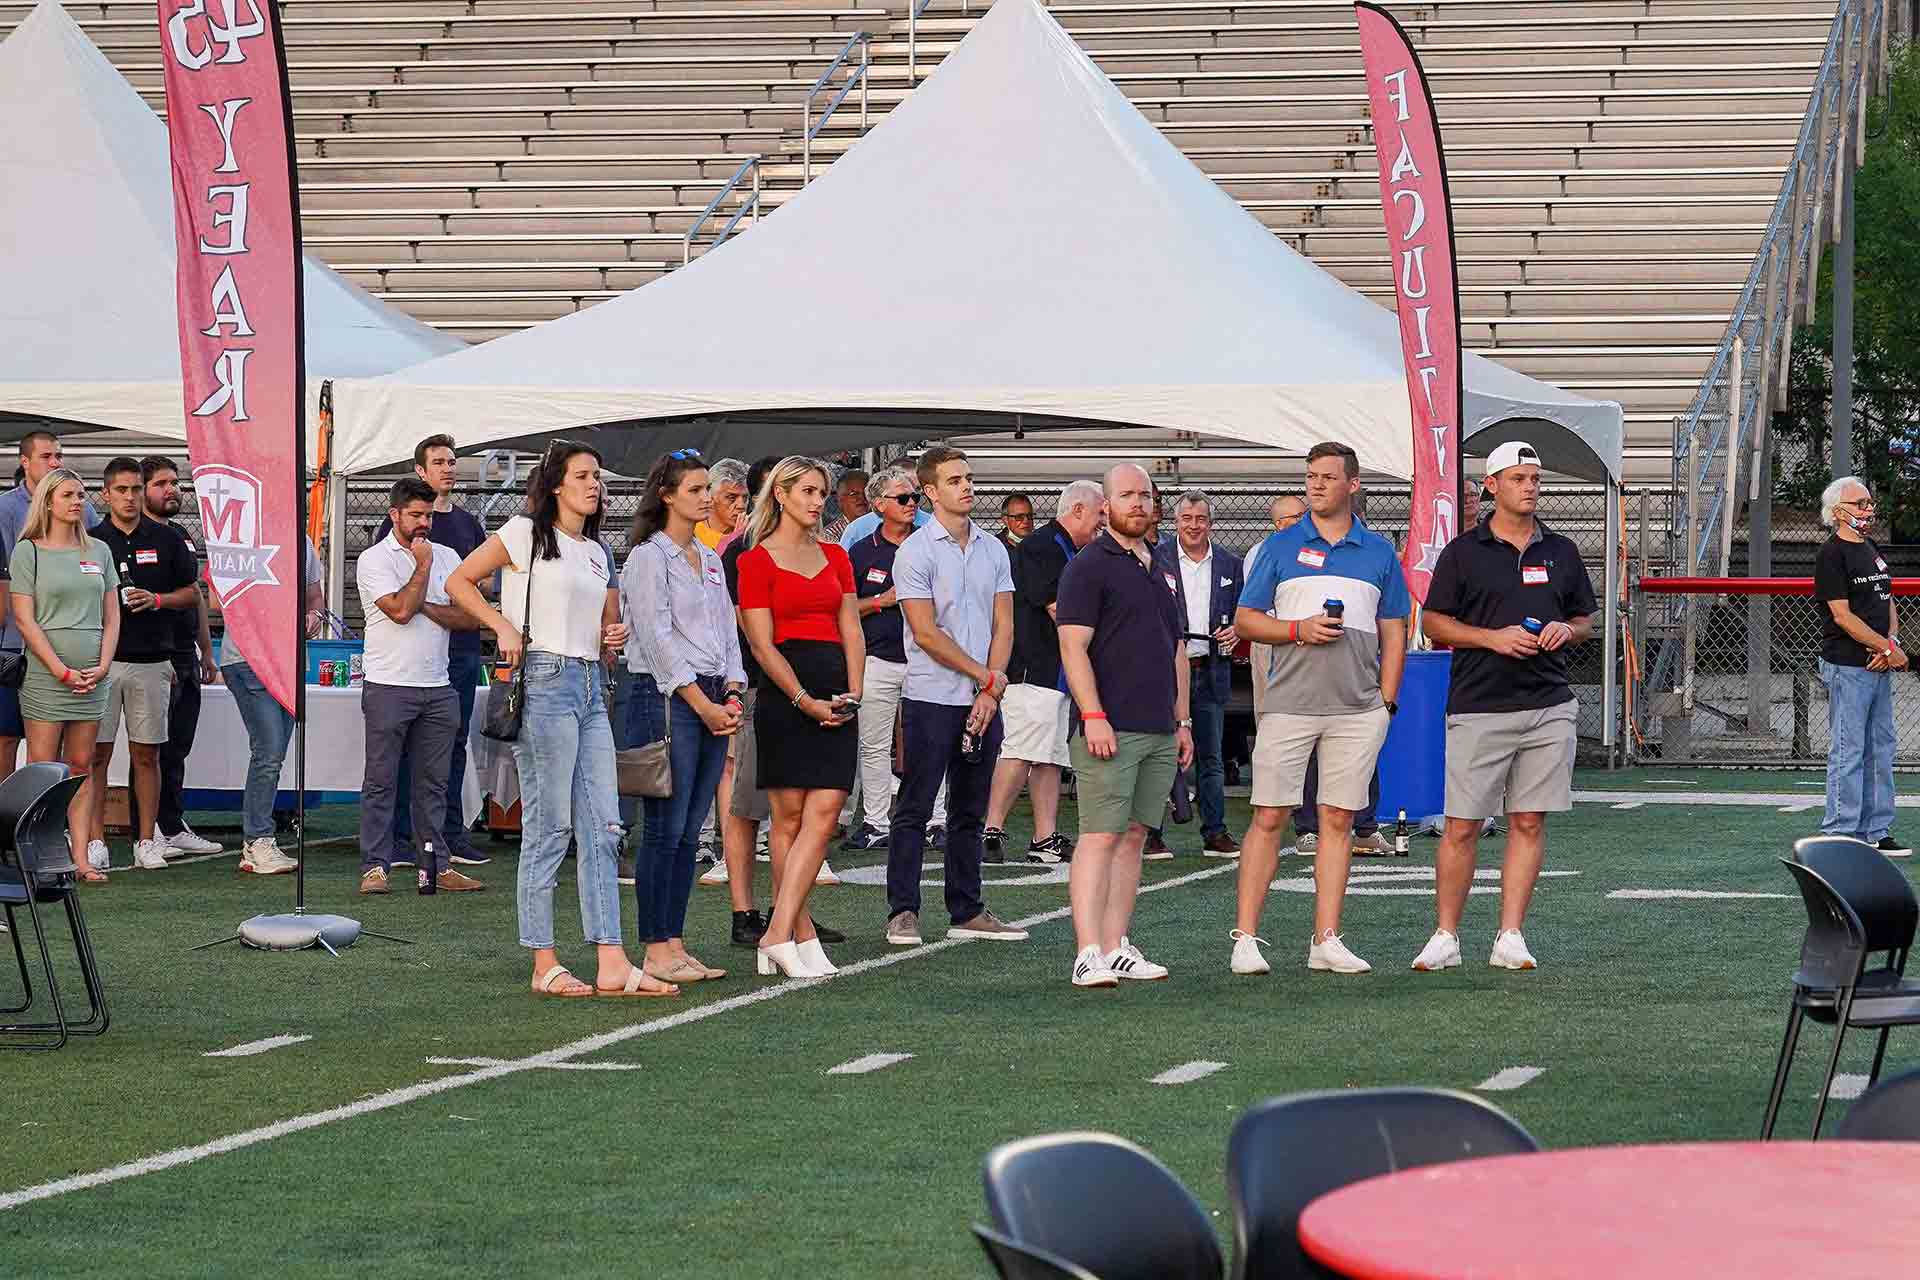 alumni-reunion-2021-group-of-people-standing-by-tent